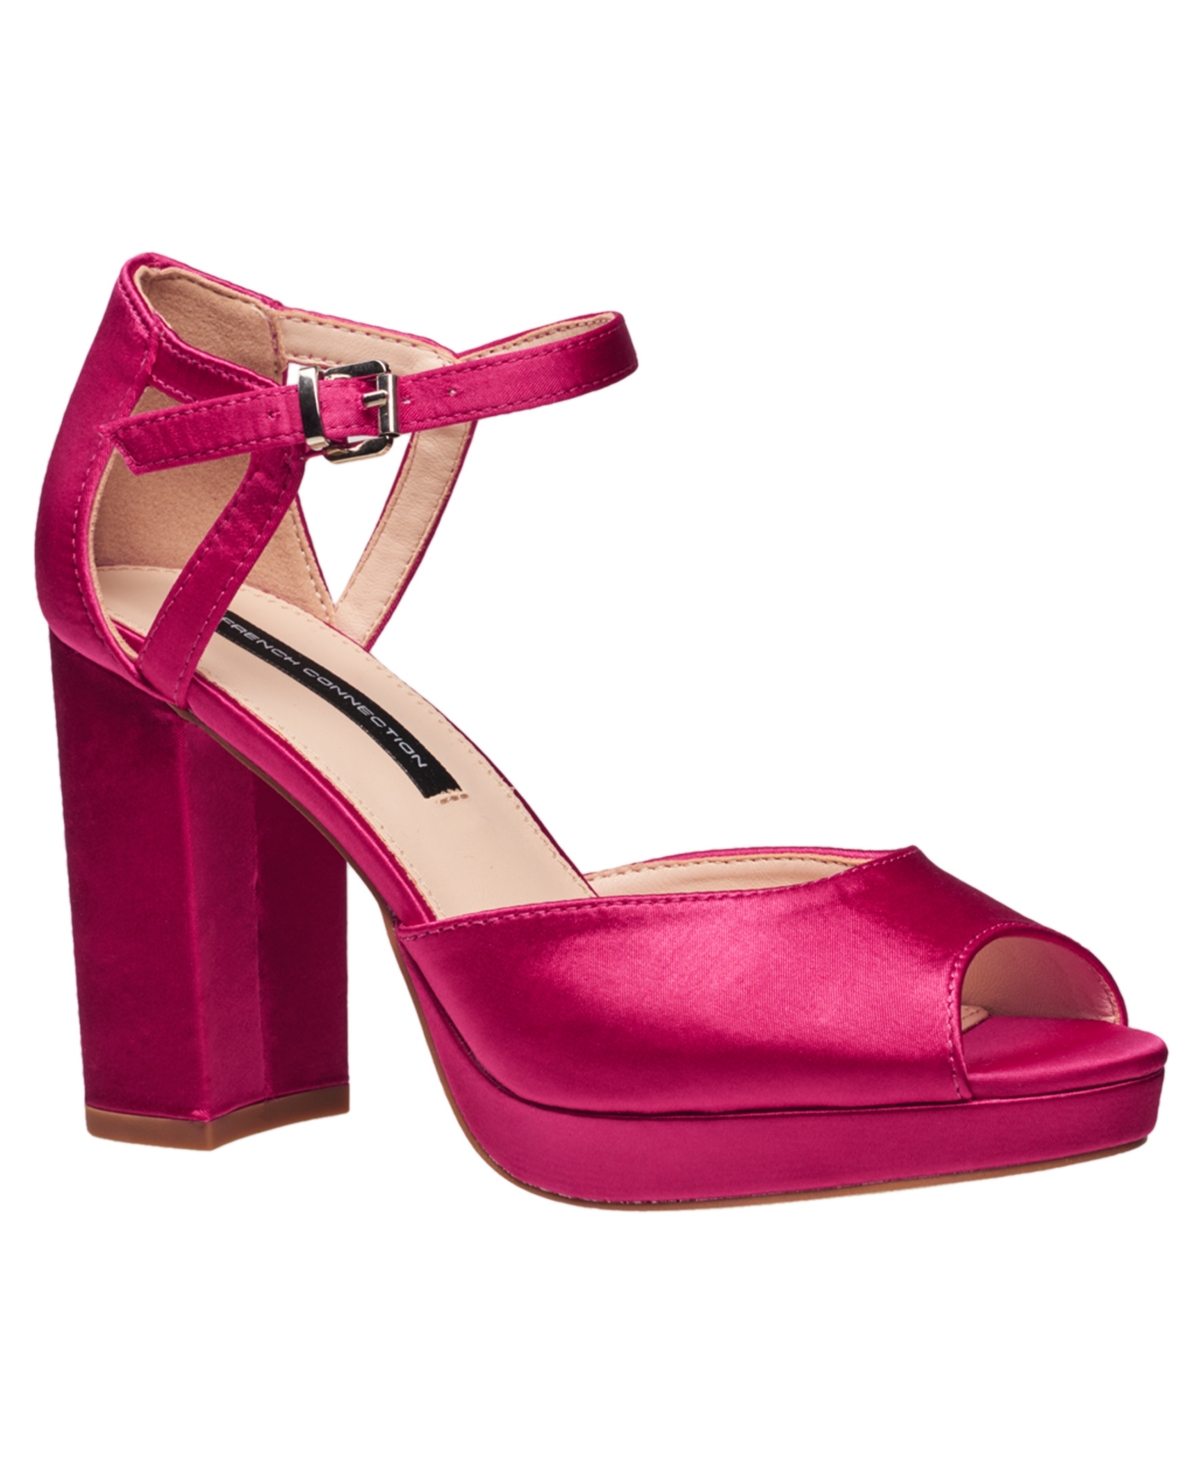 Shop French Connection Women's Platform Peep Toe Pumps In Pink